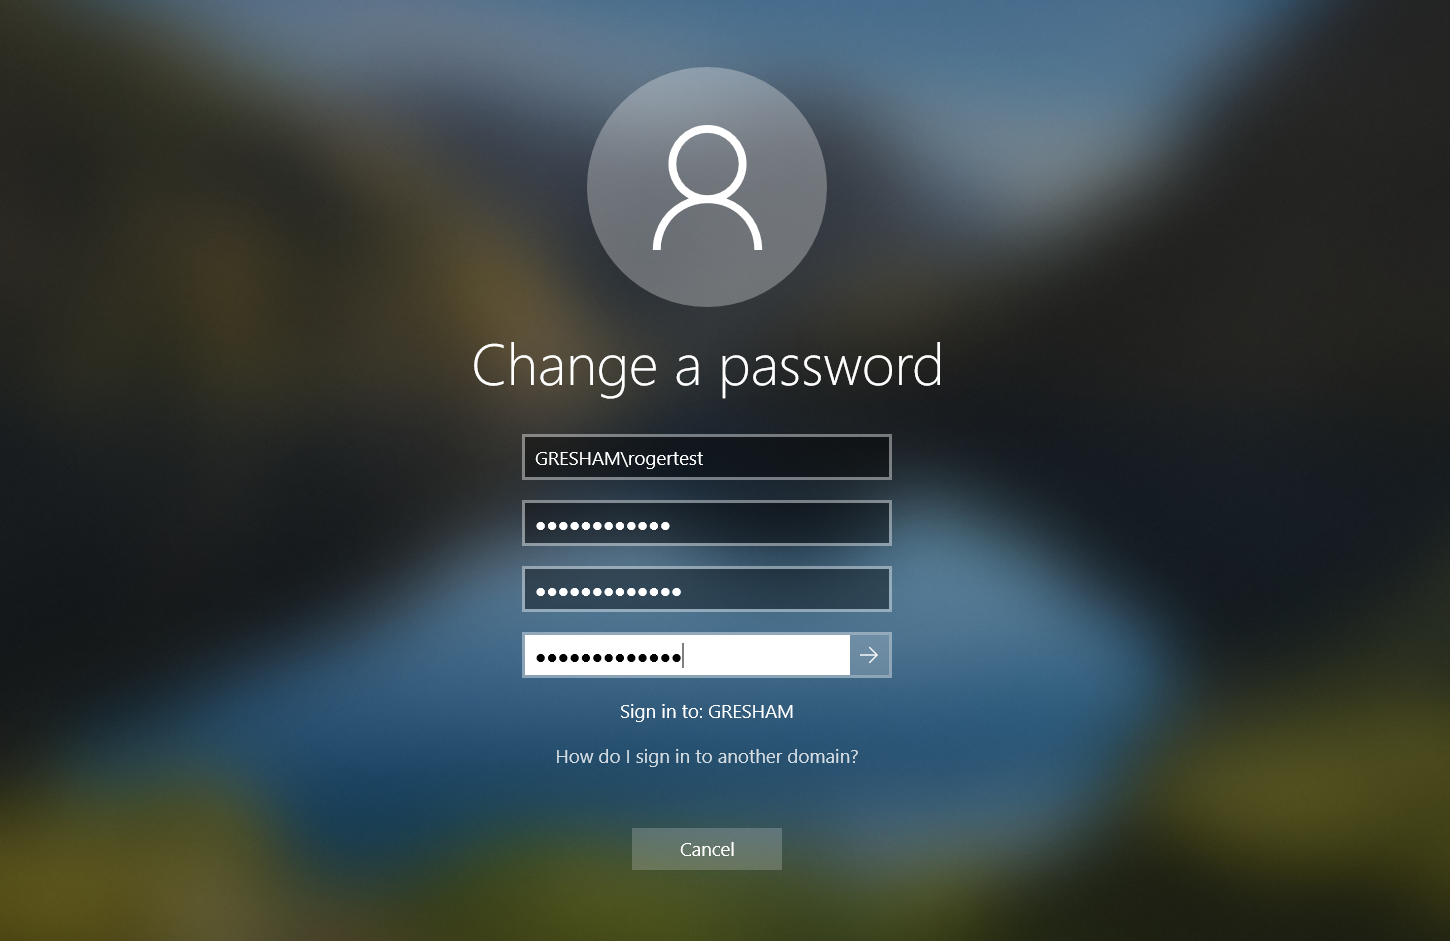 Enter your current password, then the new password.